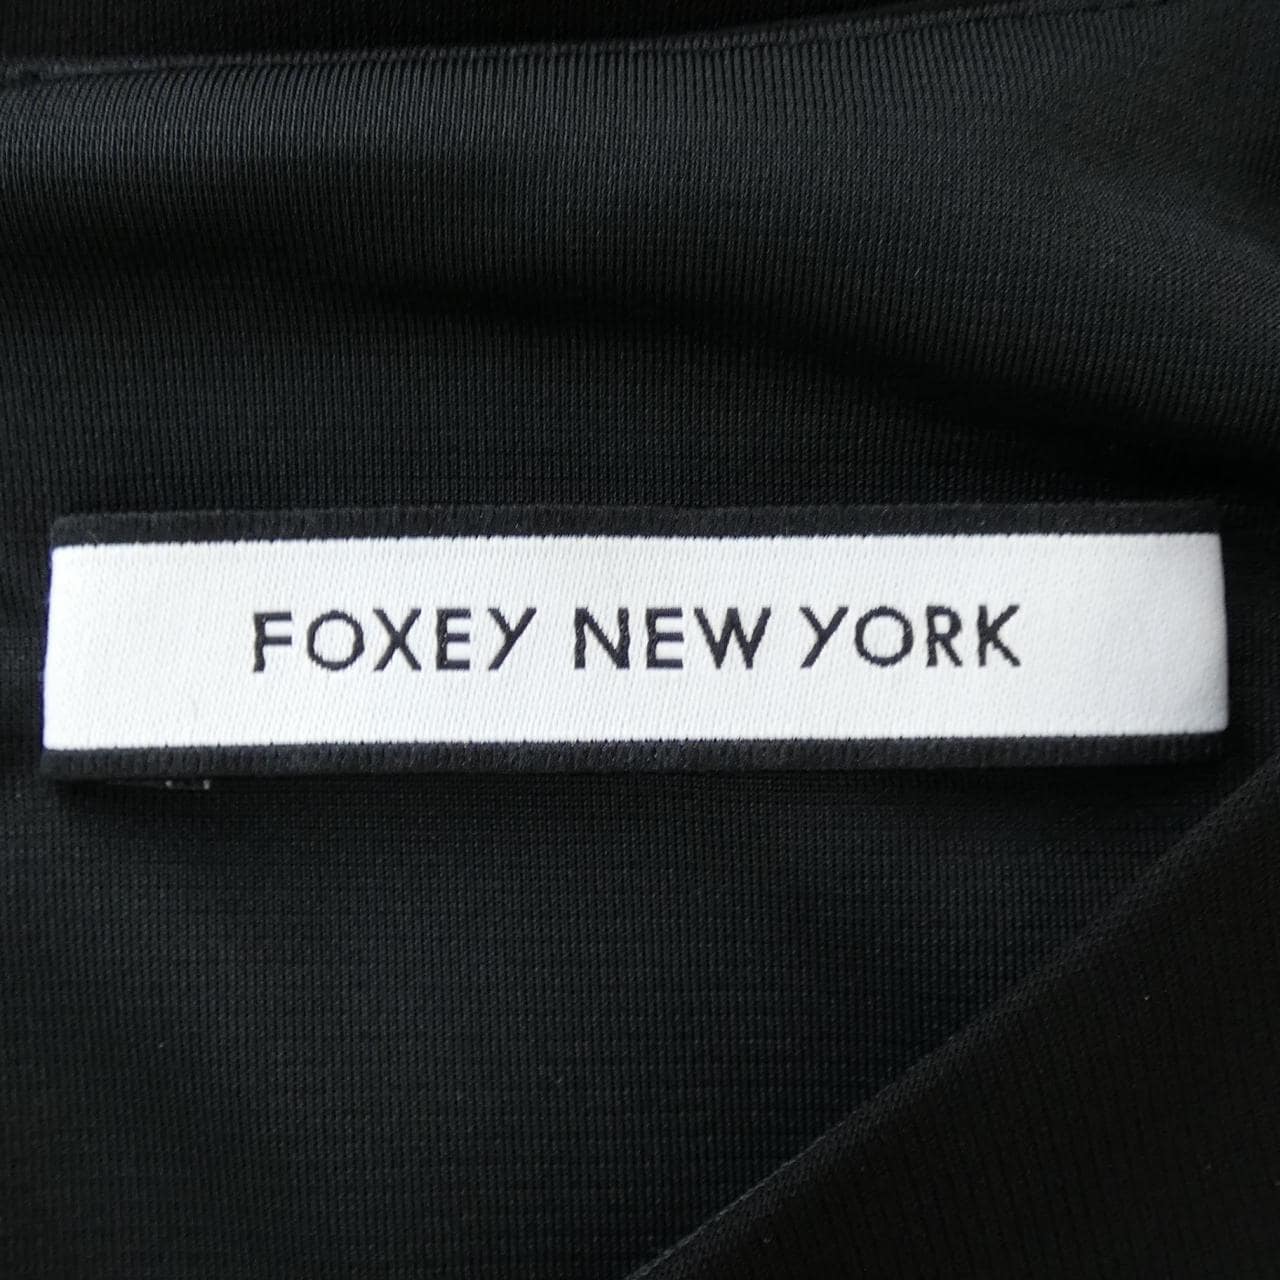 FOXEY NEW YORK FOXEY NEW YORK All-in-one